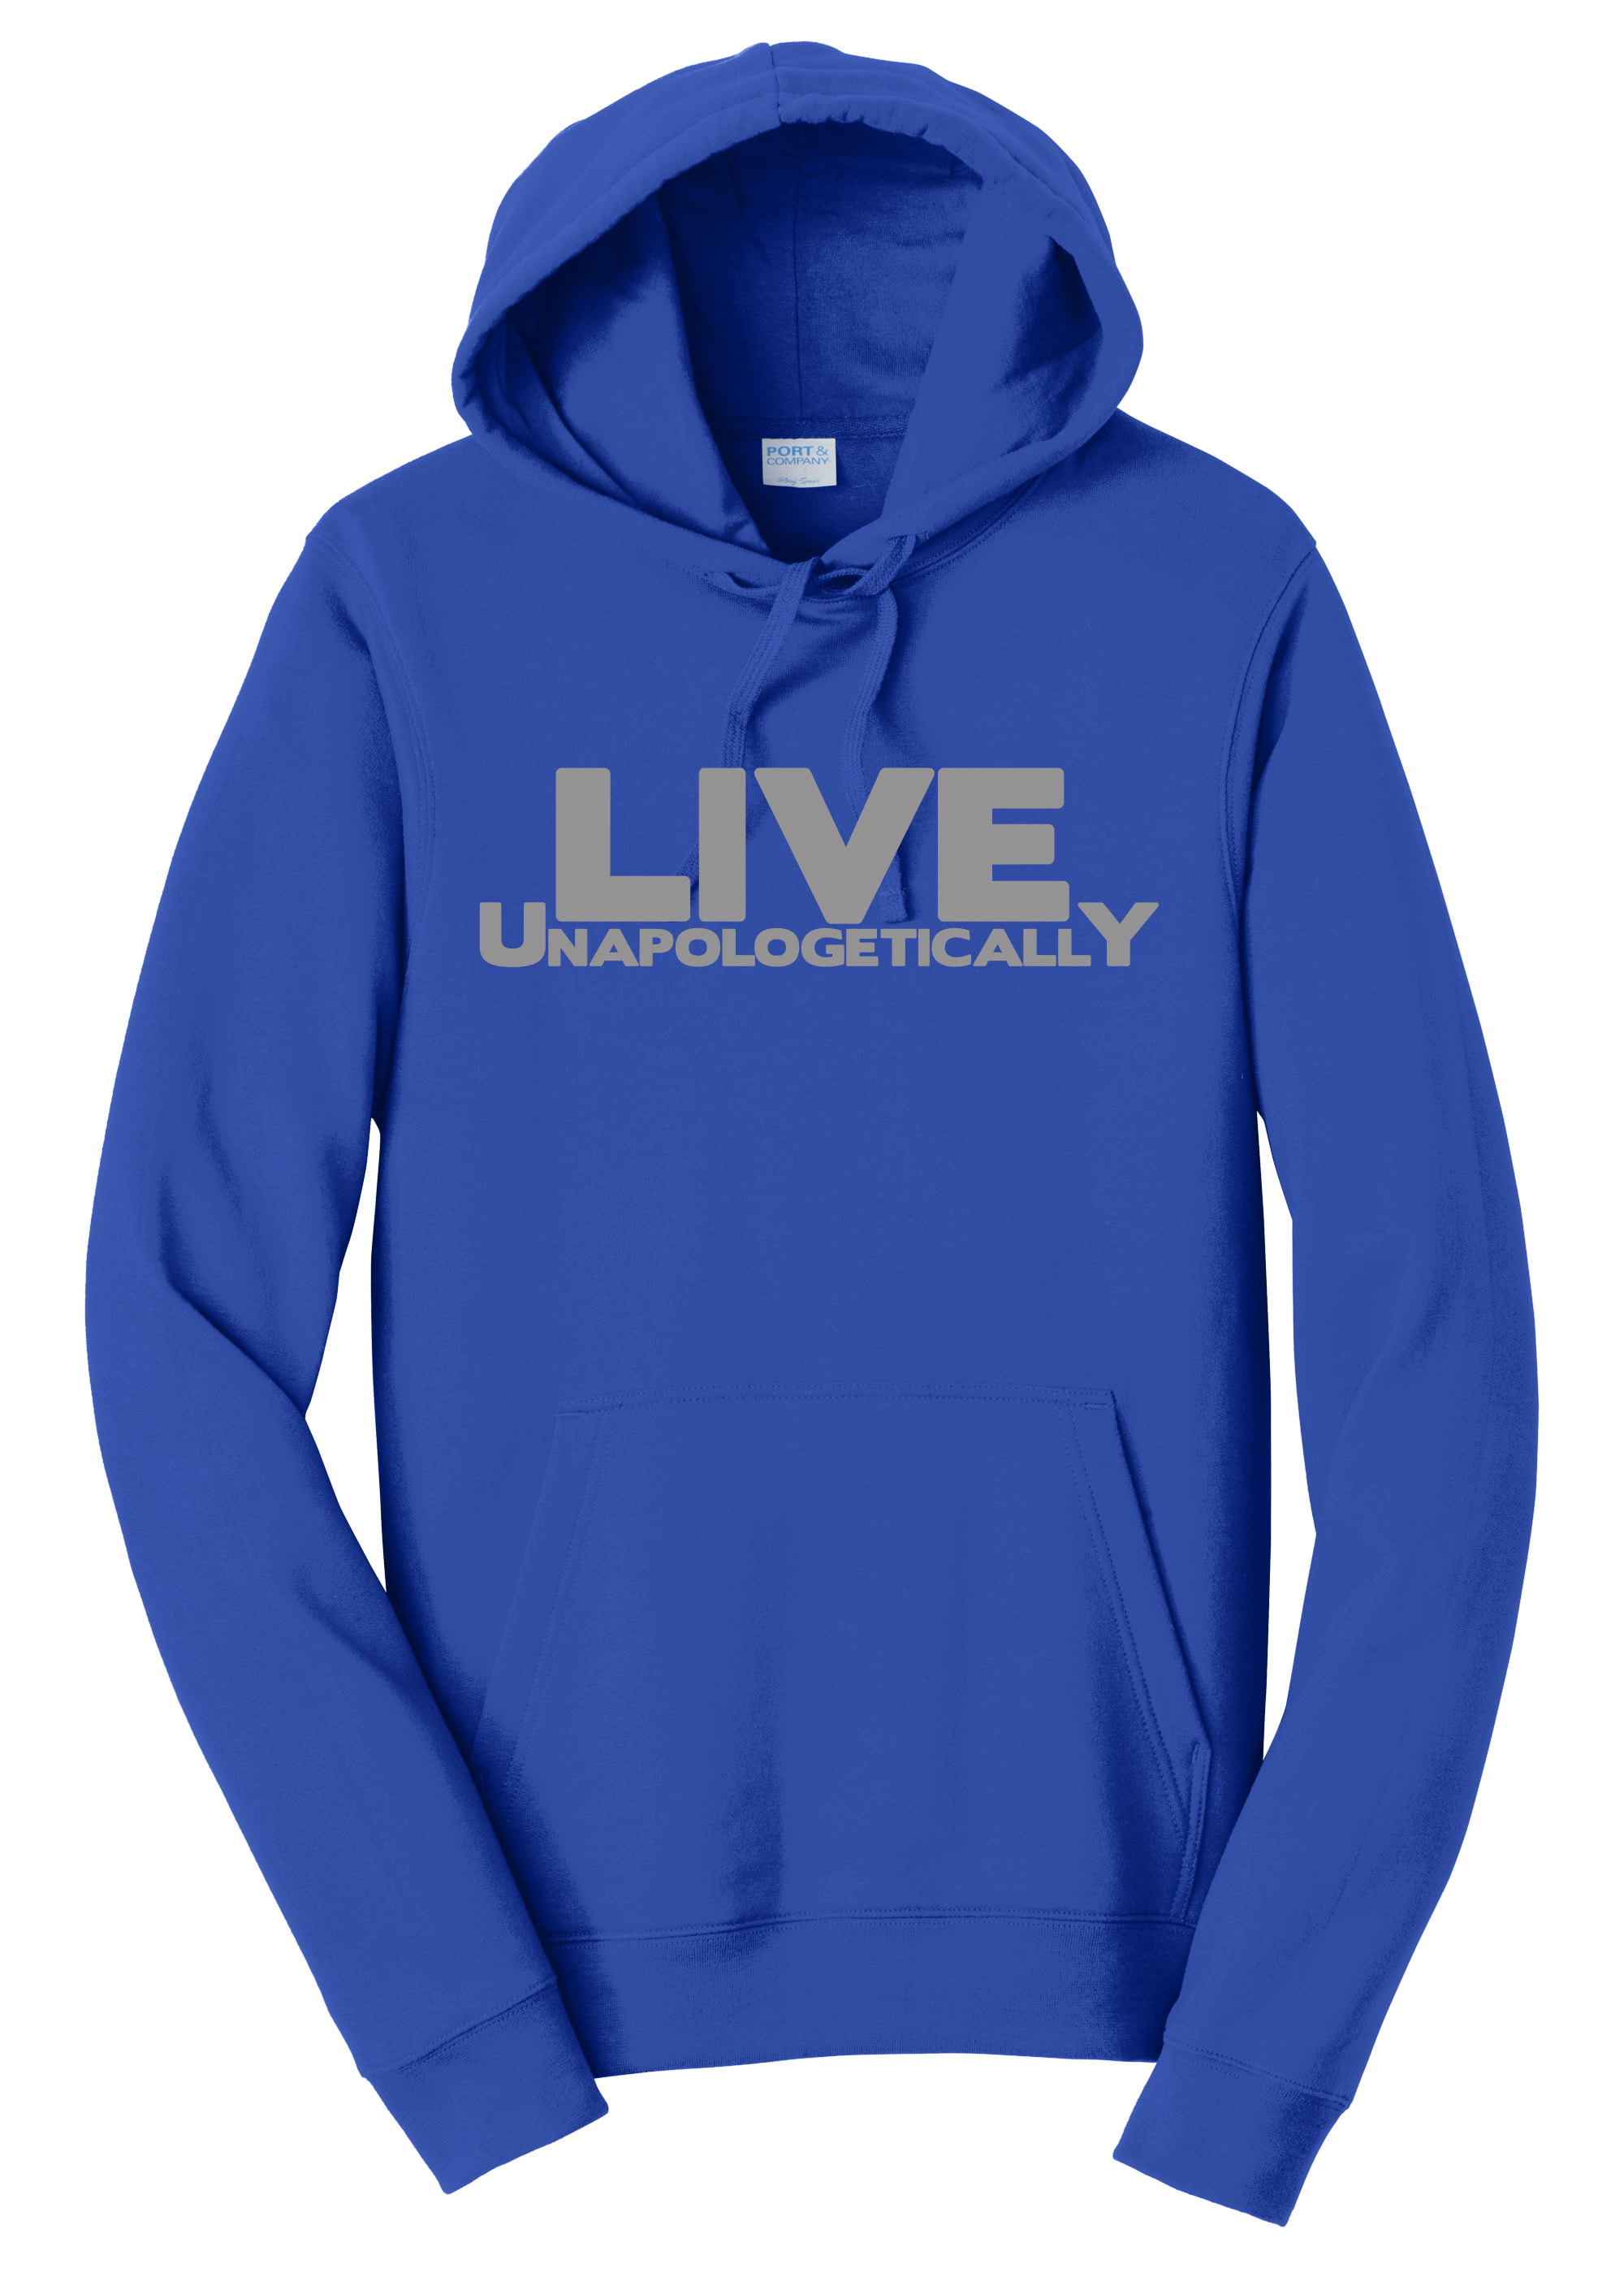 Live Unapologetically Hoodie